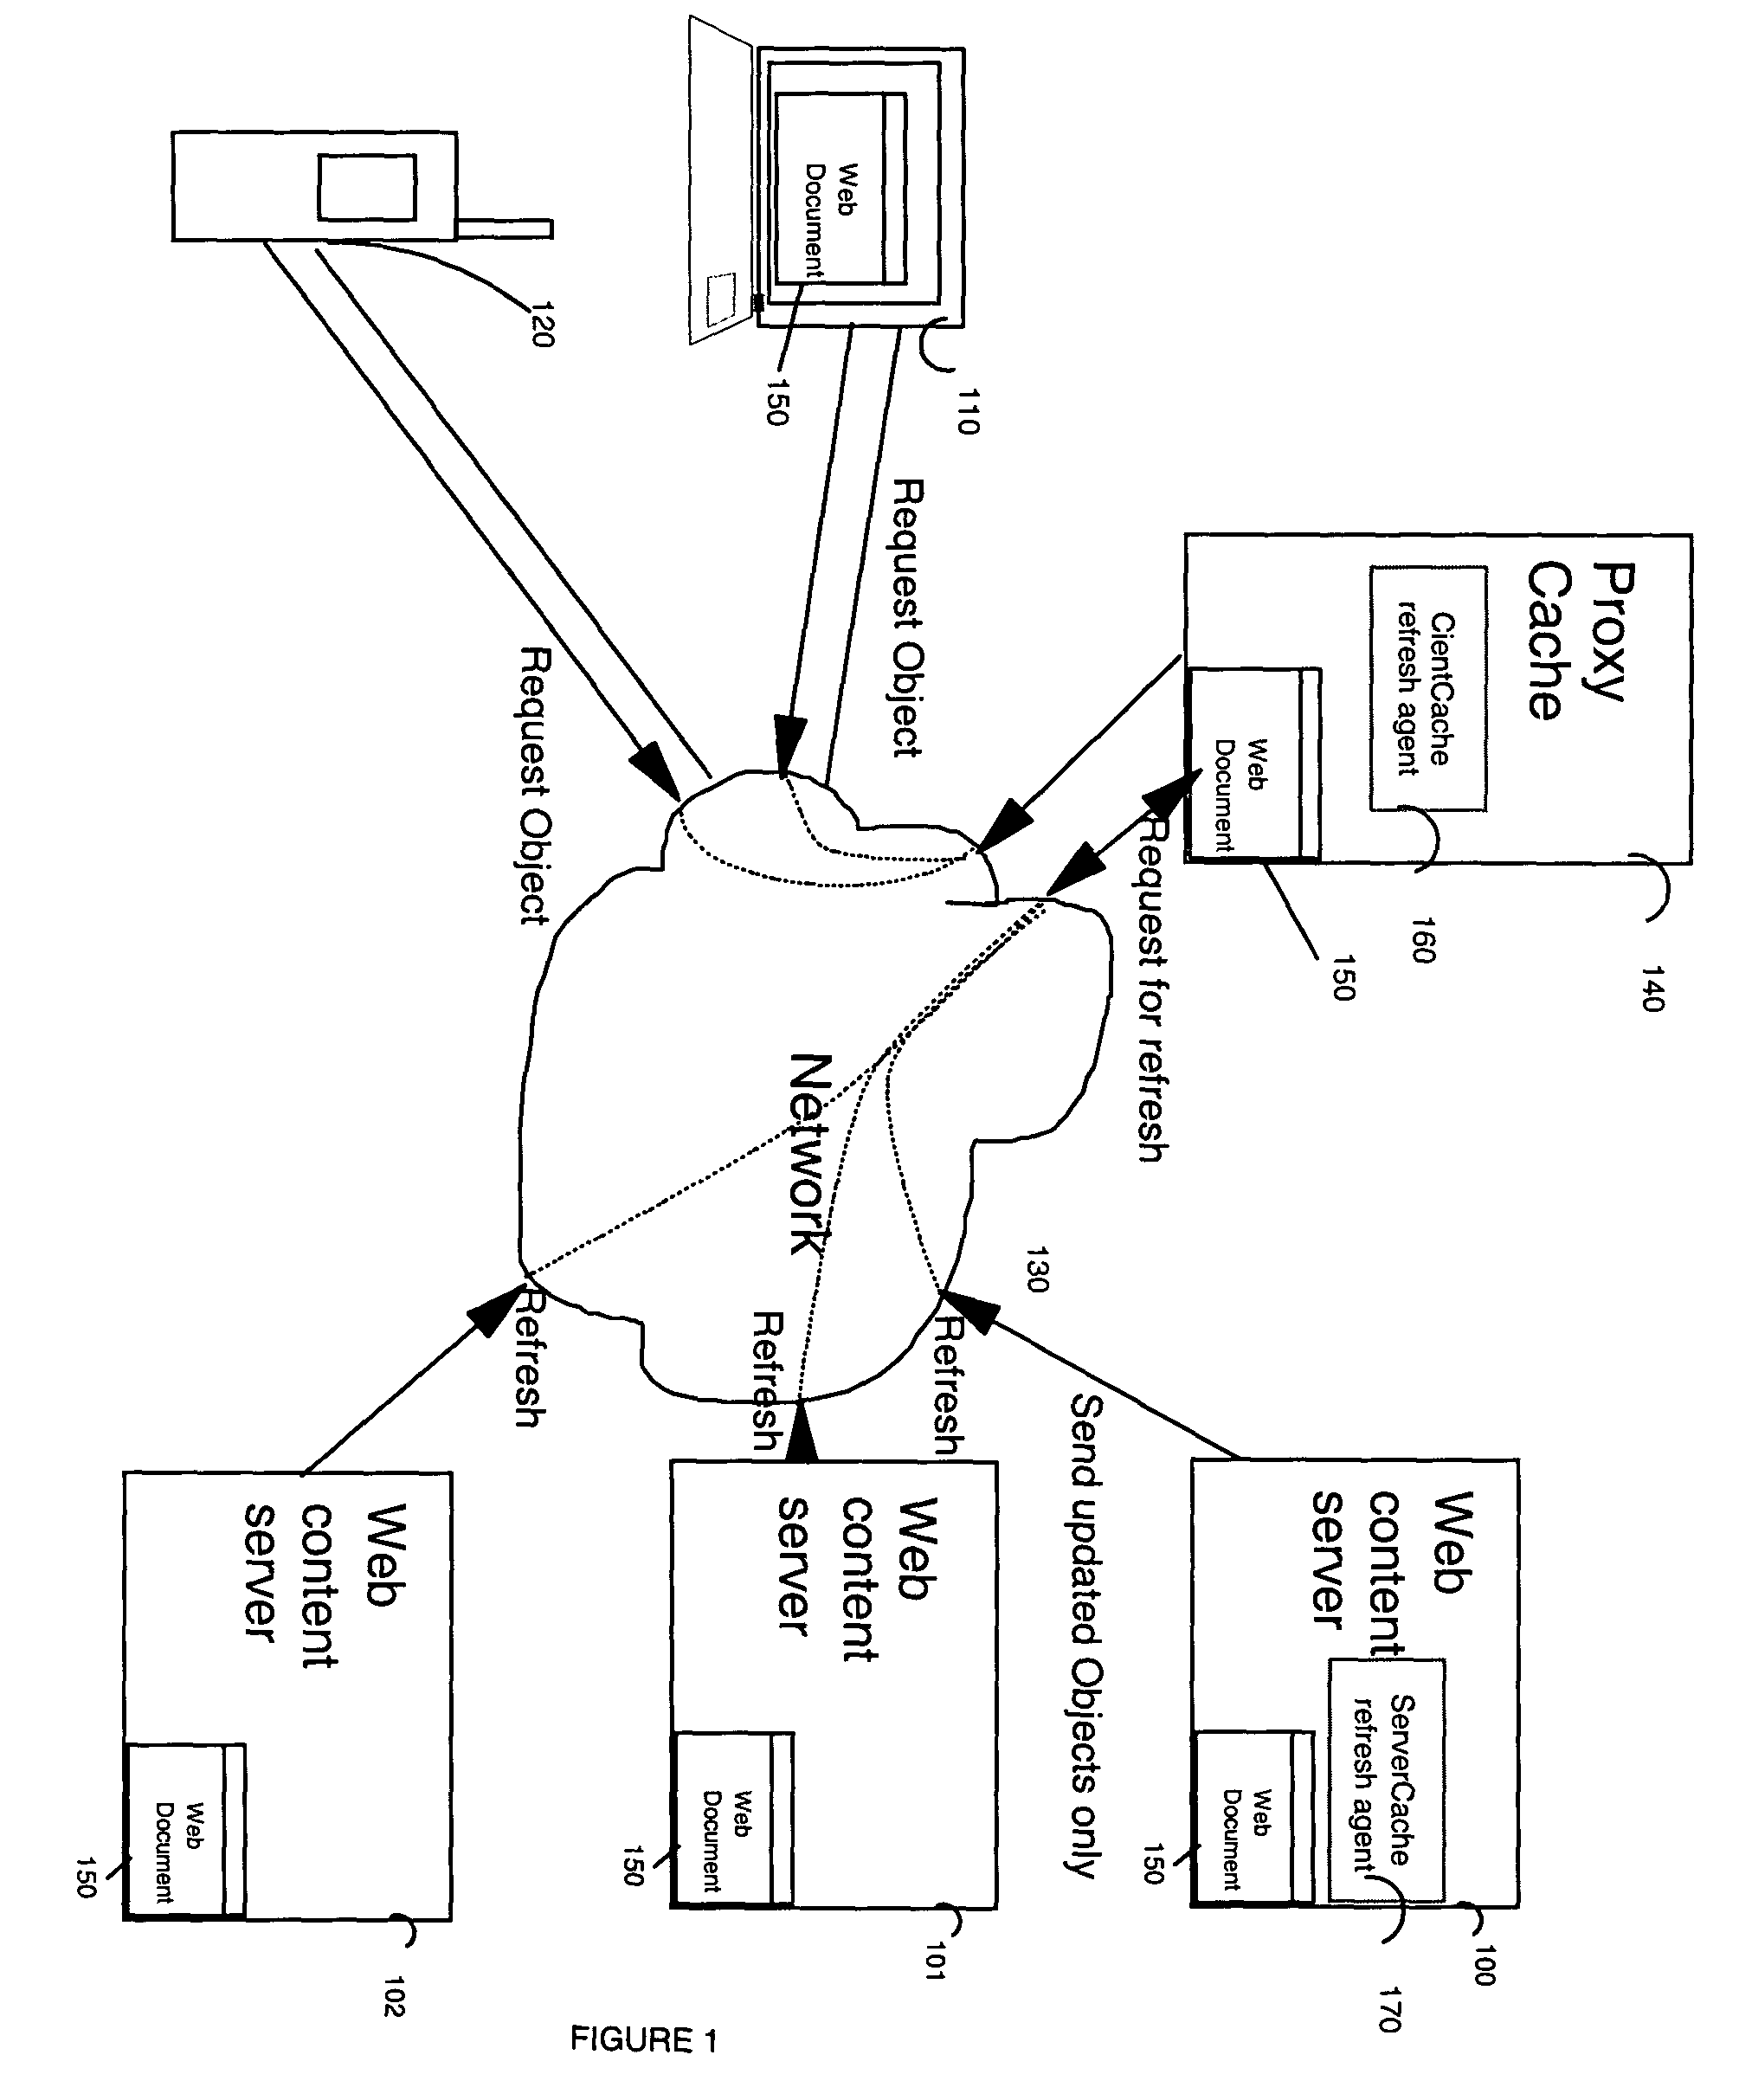 System and method to refresh proxy cache server objects